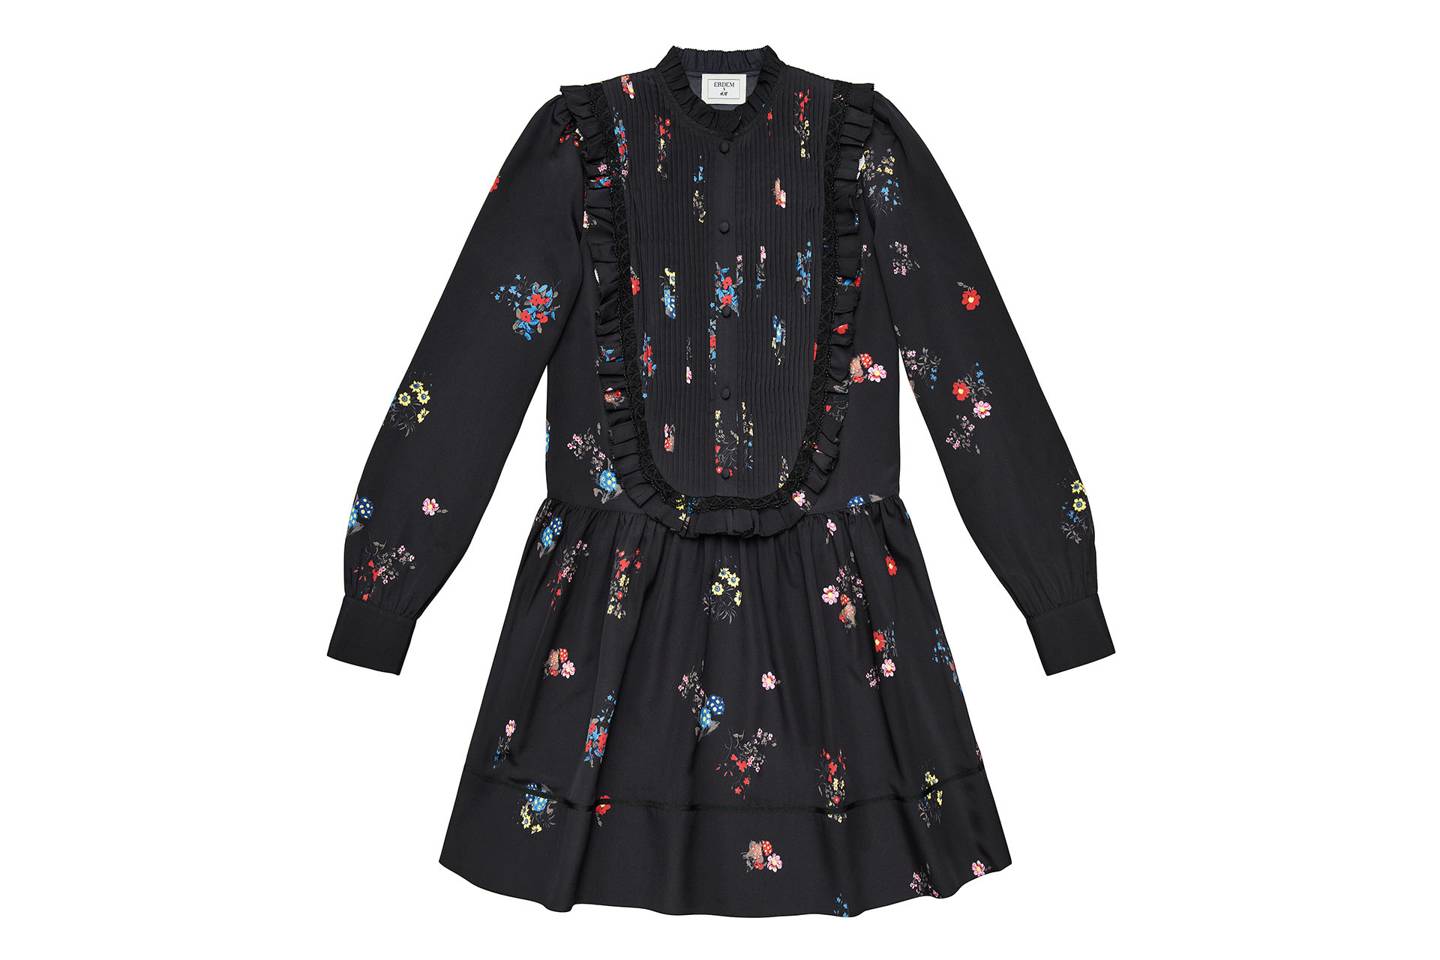 Erdem X H&M release date and clothes | Glamour UK